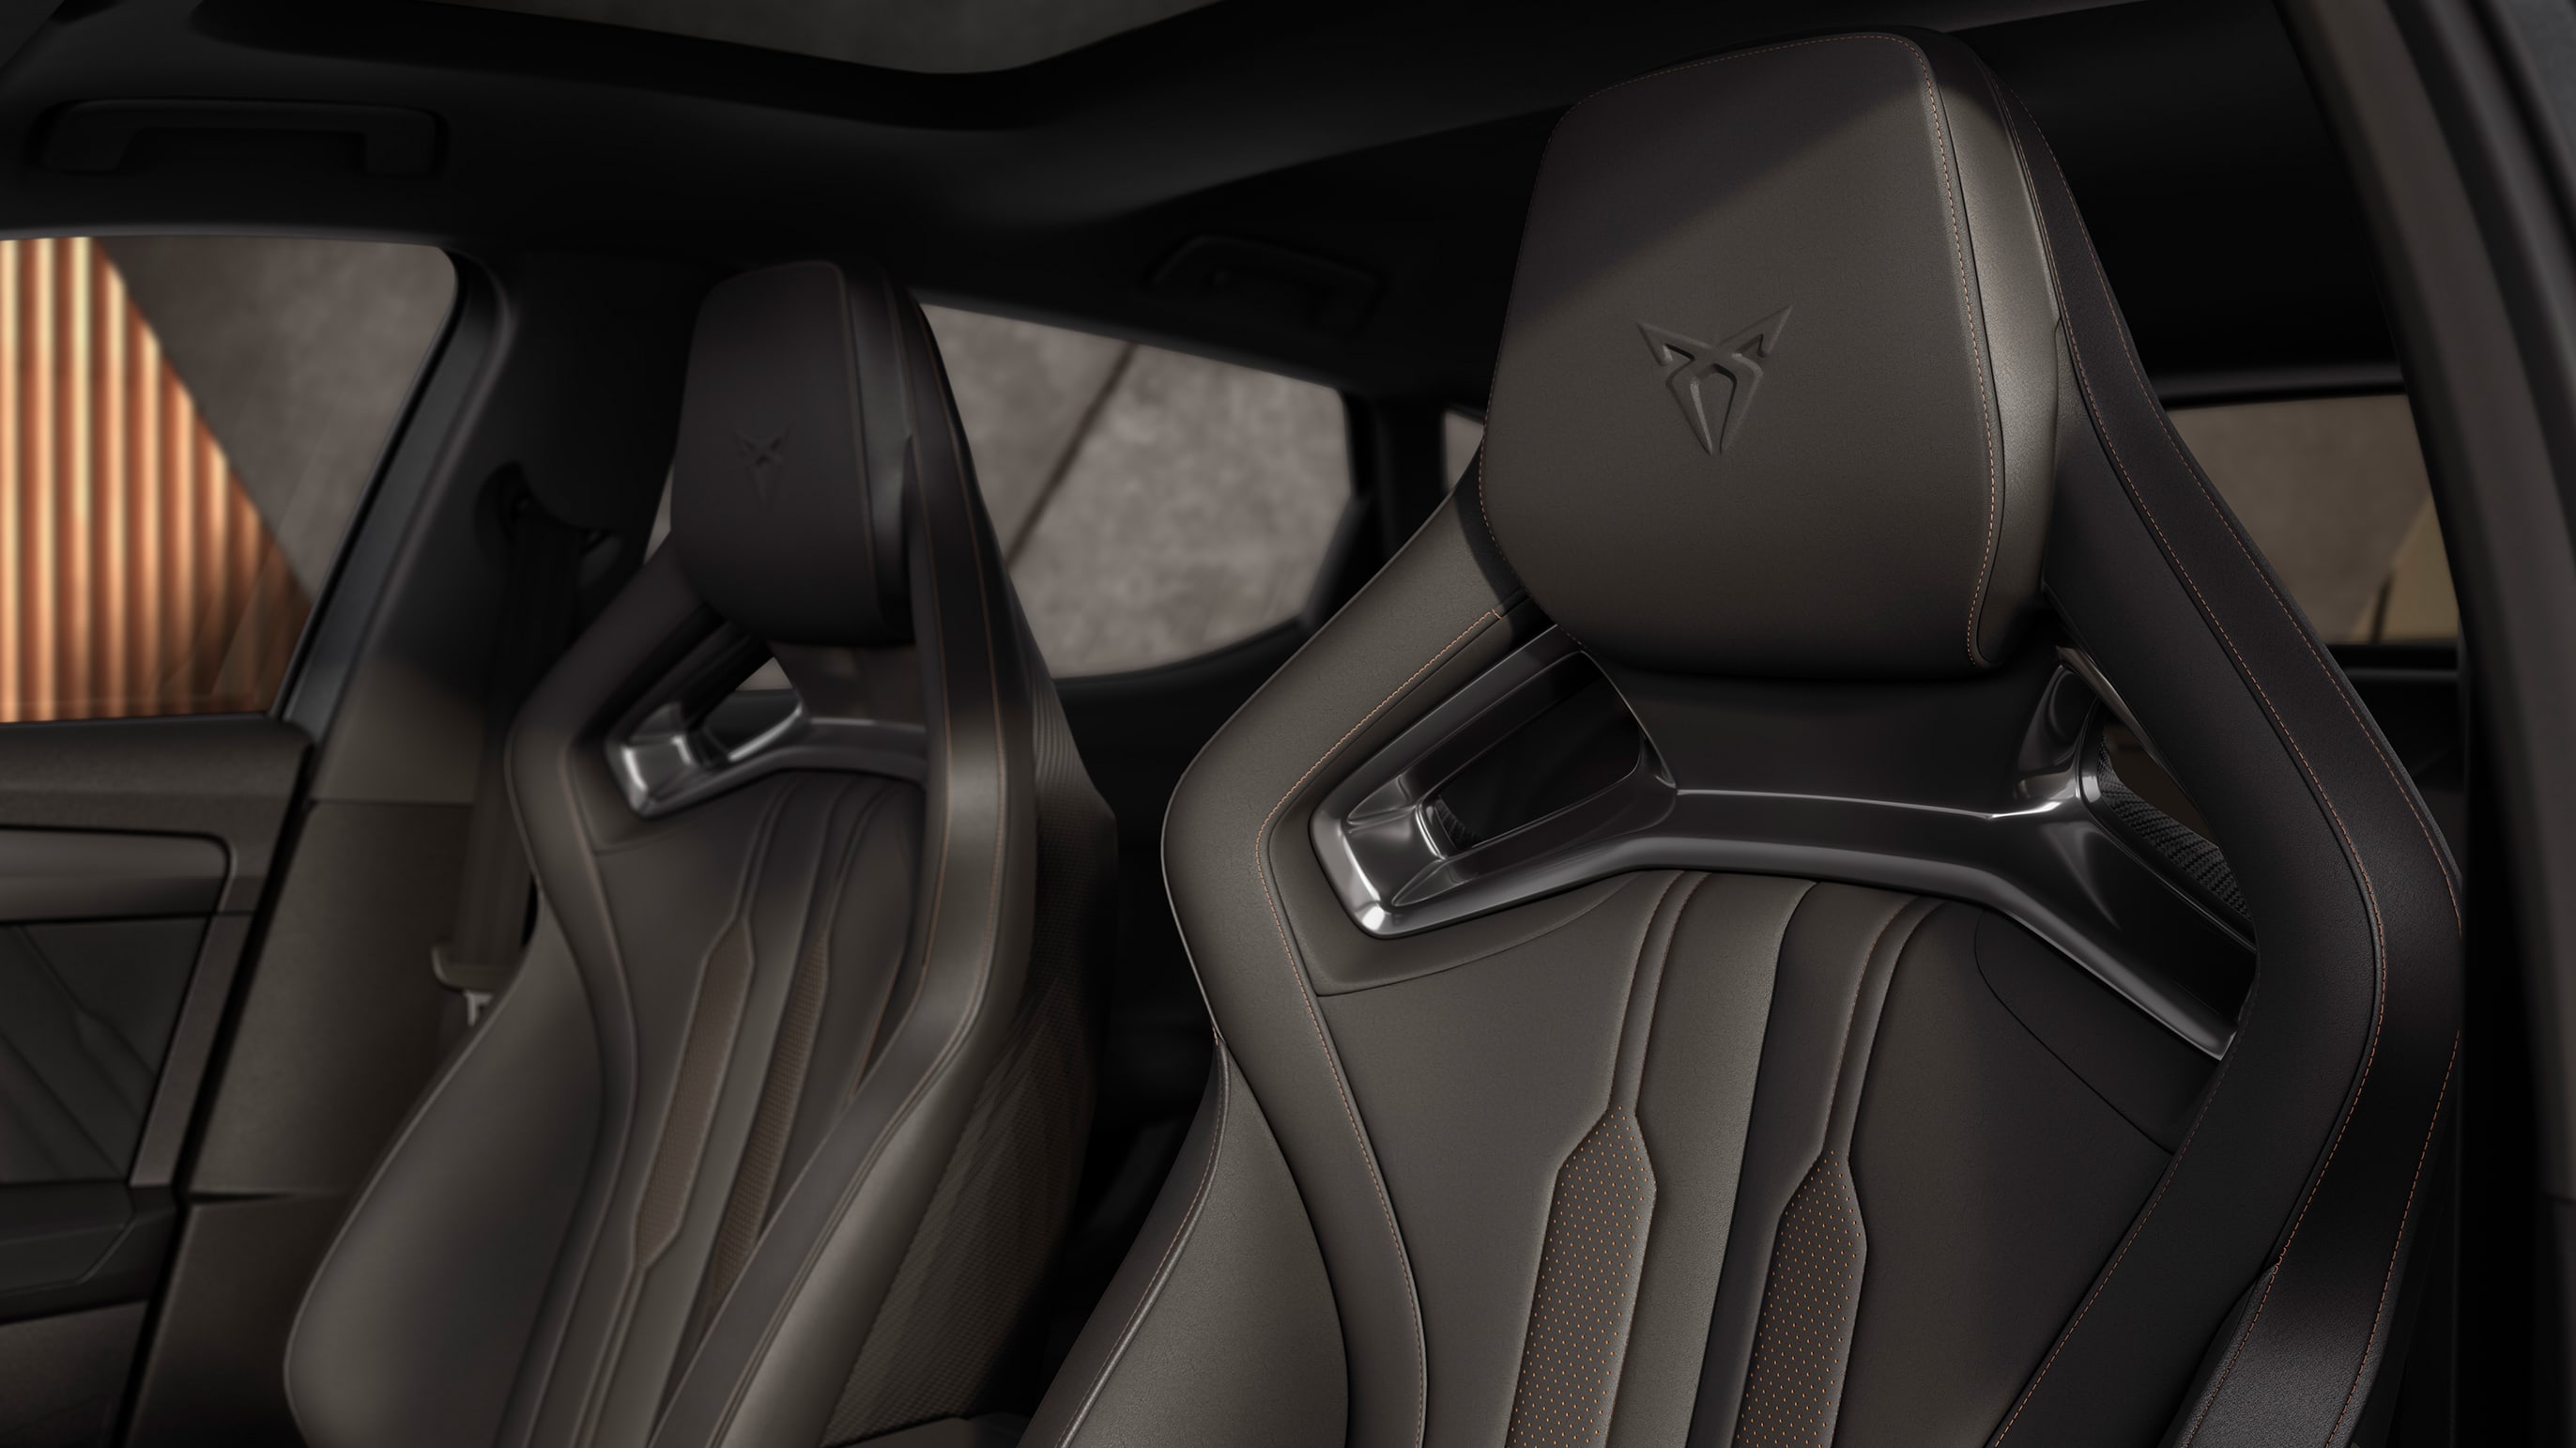 CUPRA Car Accessories for the Interior and Exterior